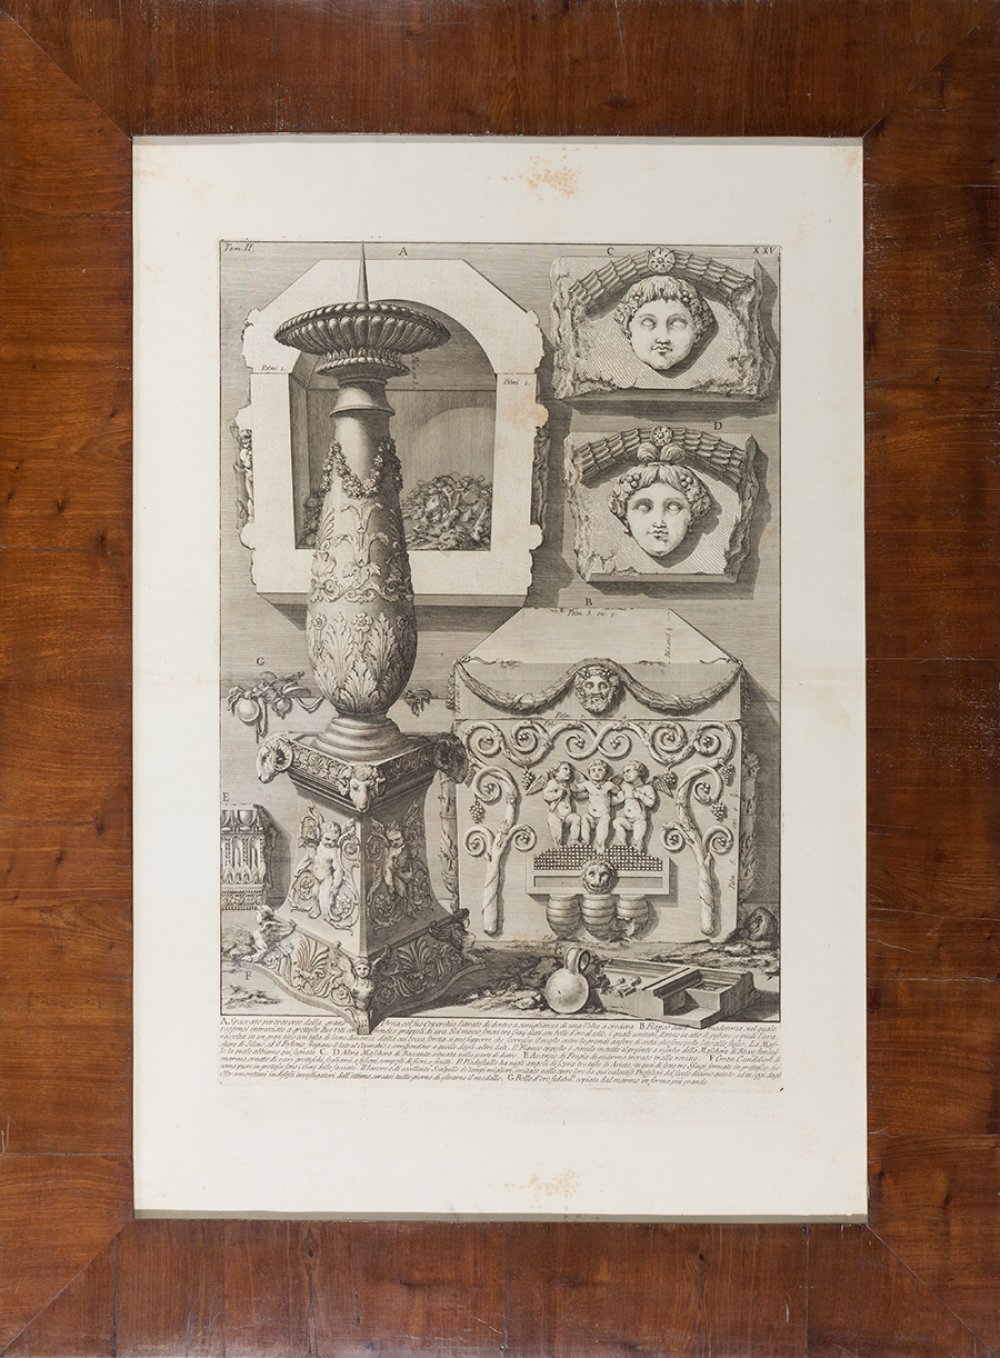 BATTISTA GIOVANNI PIRANESI (Italy, 1720-1778)."Roman antiquities. Large porphyry urn in which the - Image 3 of 3